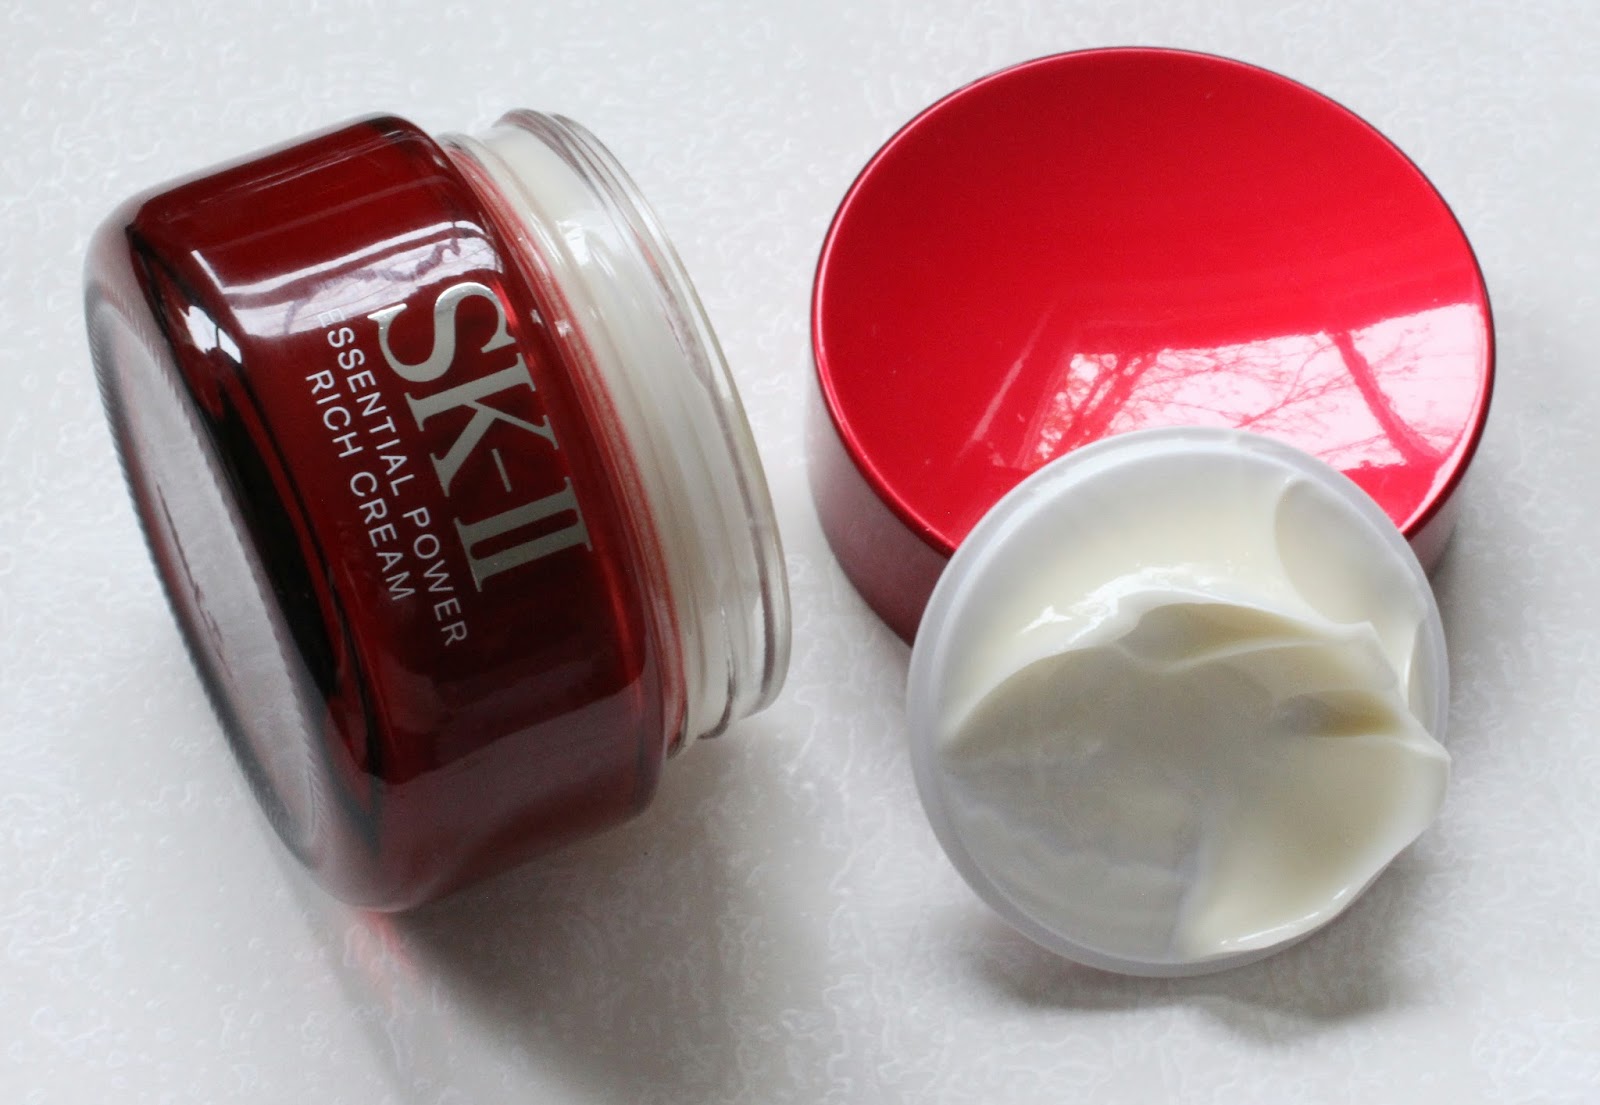 SK-II Essential Power Rich Cream review